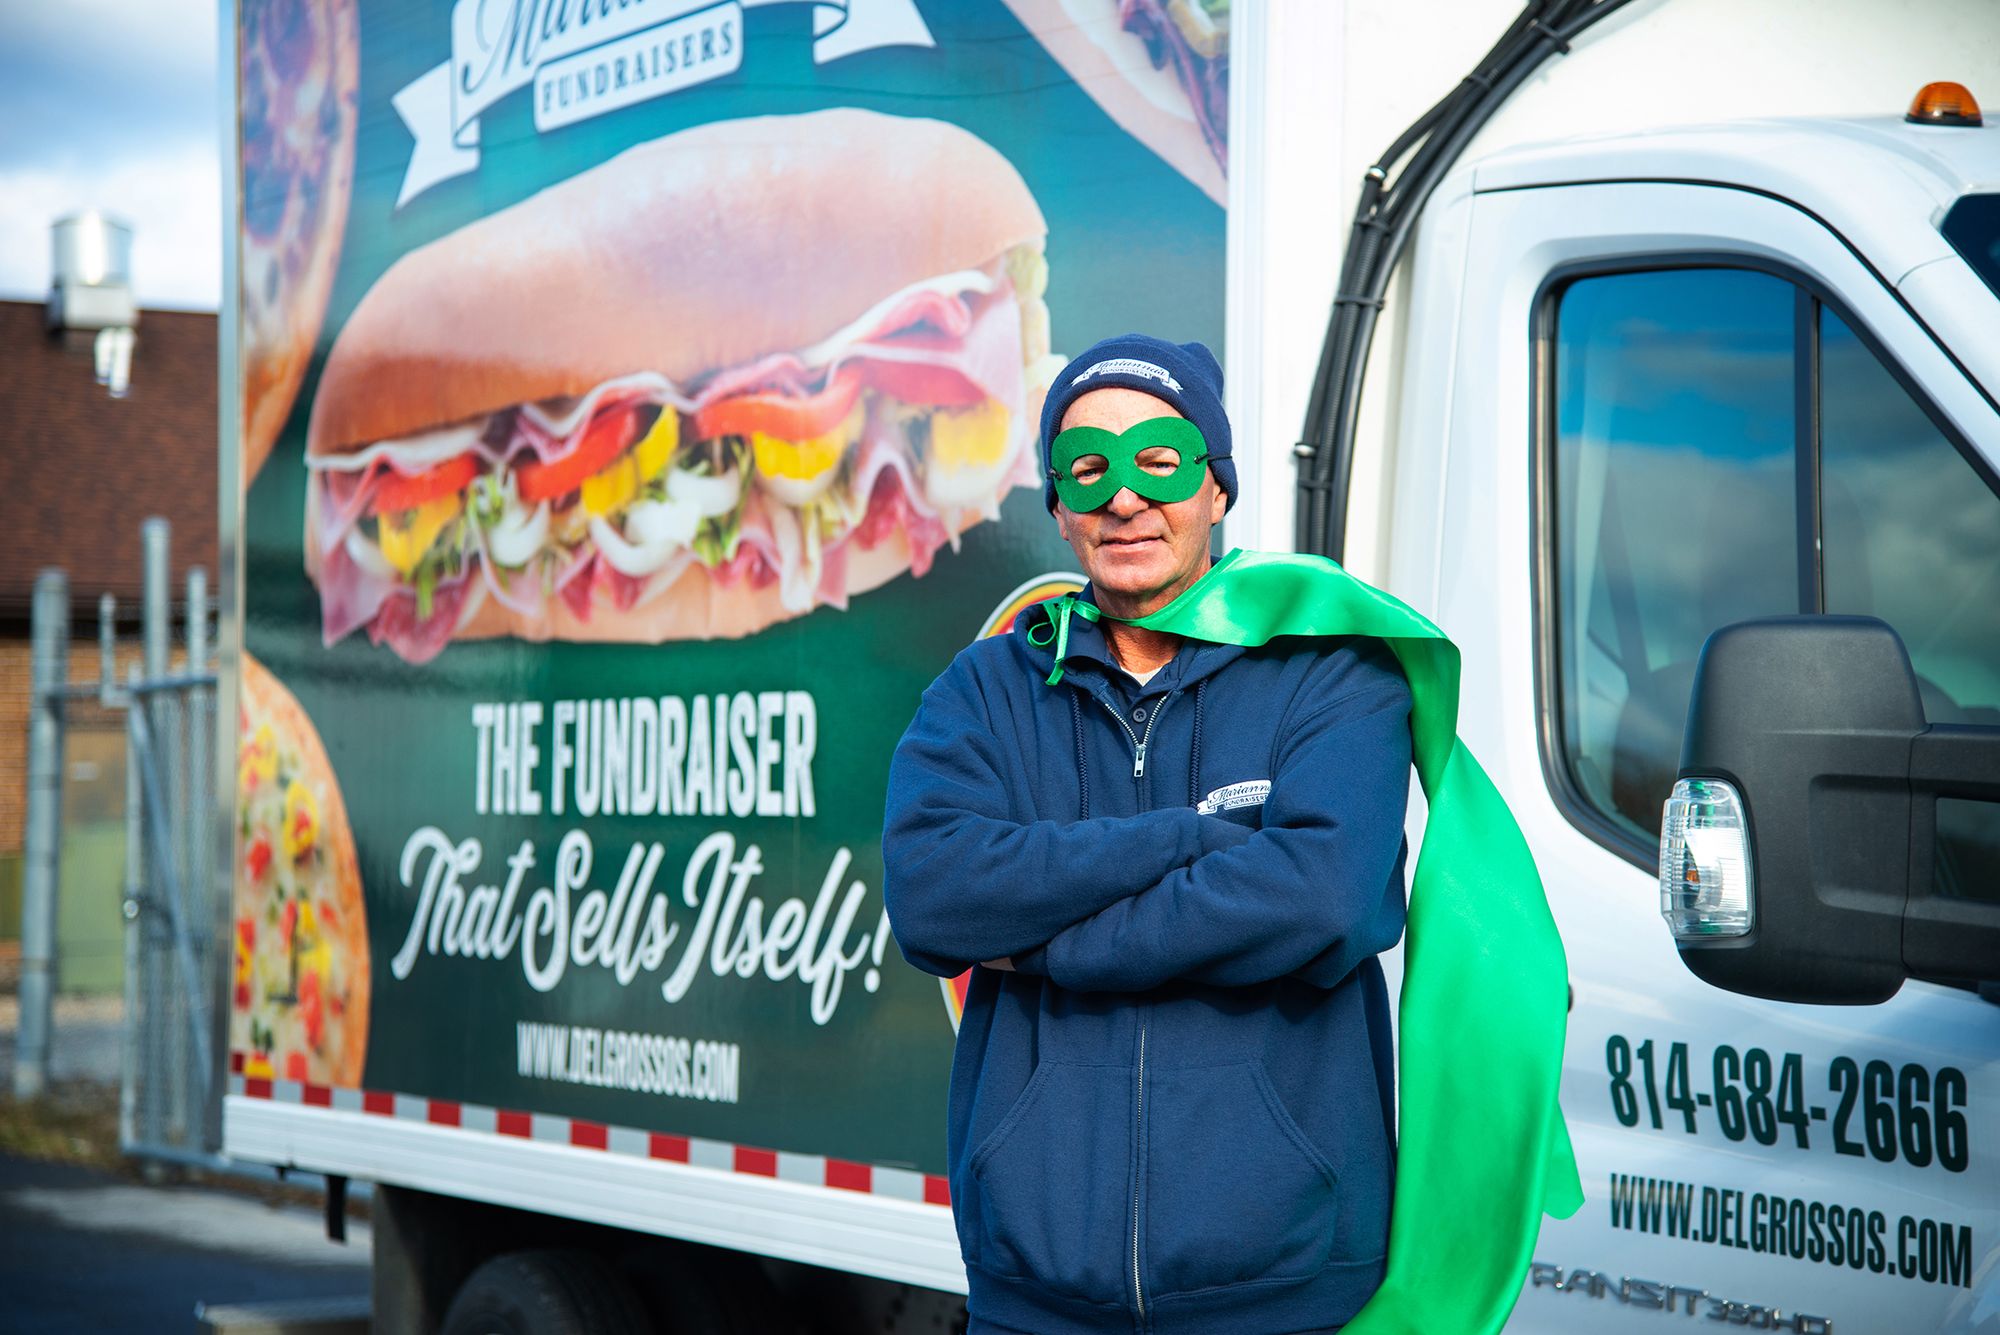 Delivery Employe posing with green cape in front of delivery truck